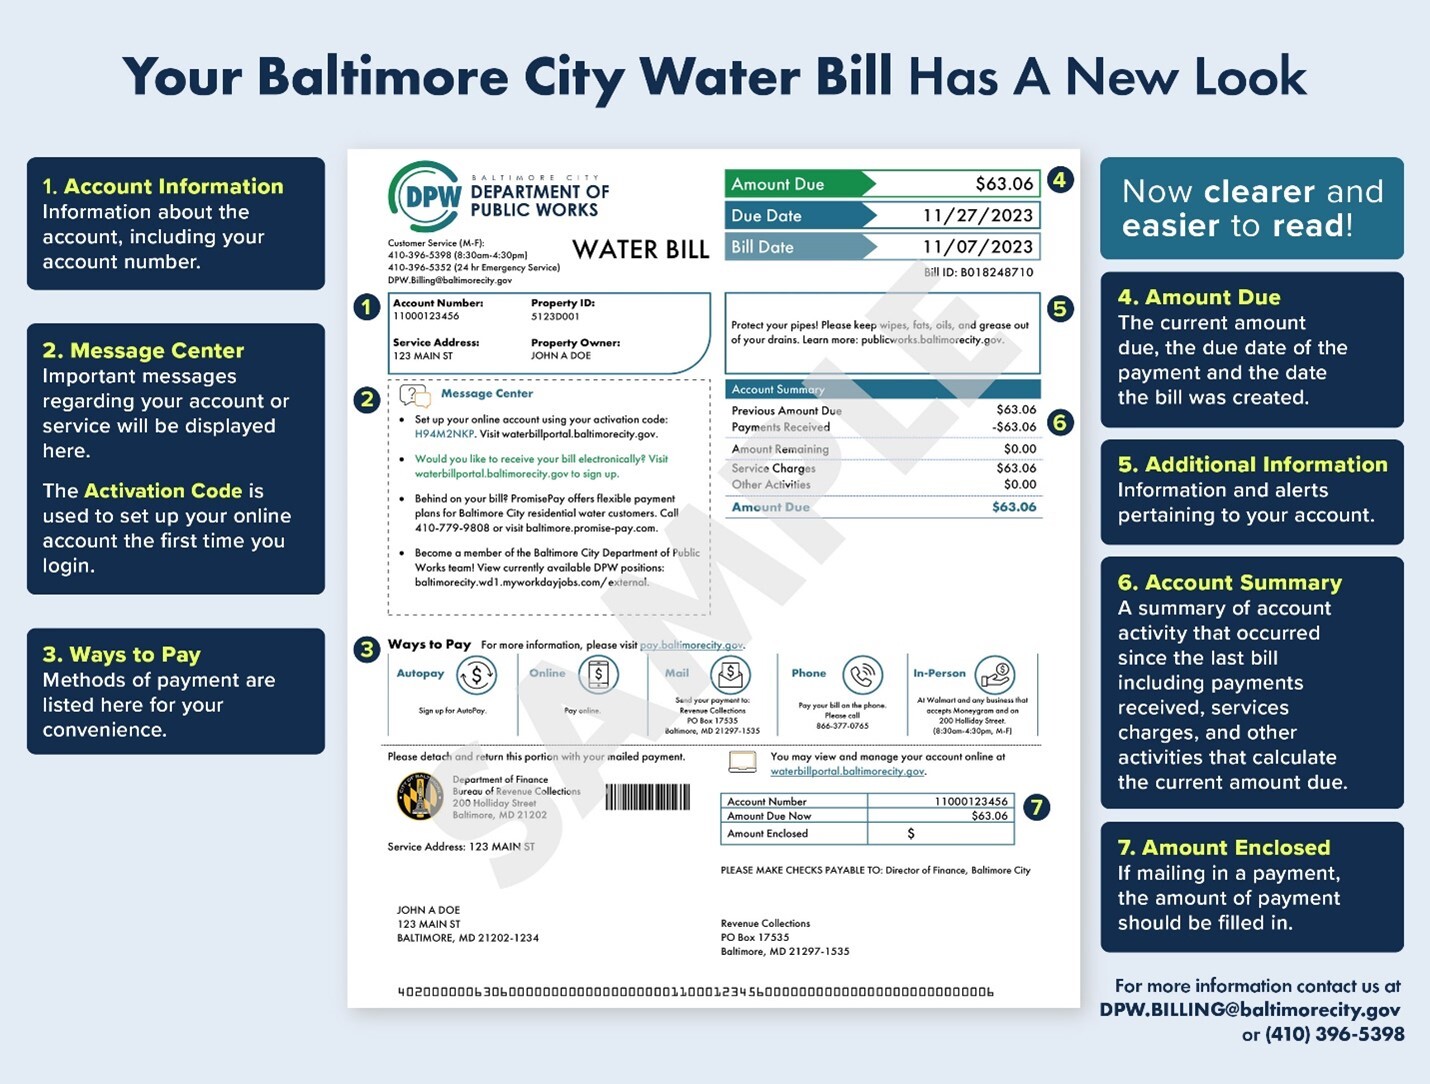 Baltimore City Water Bills Have a New Look 